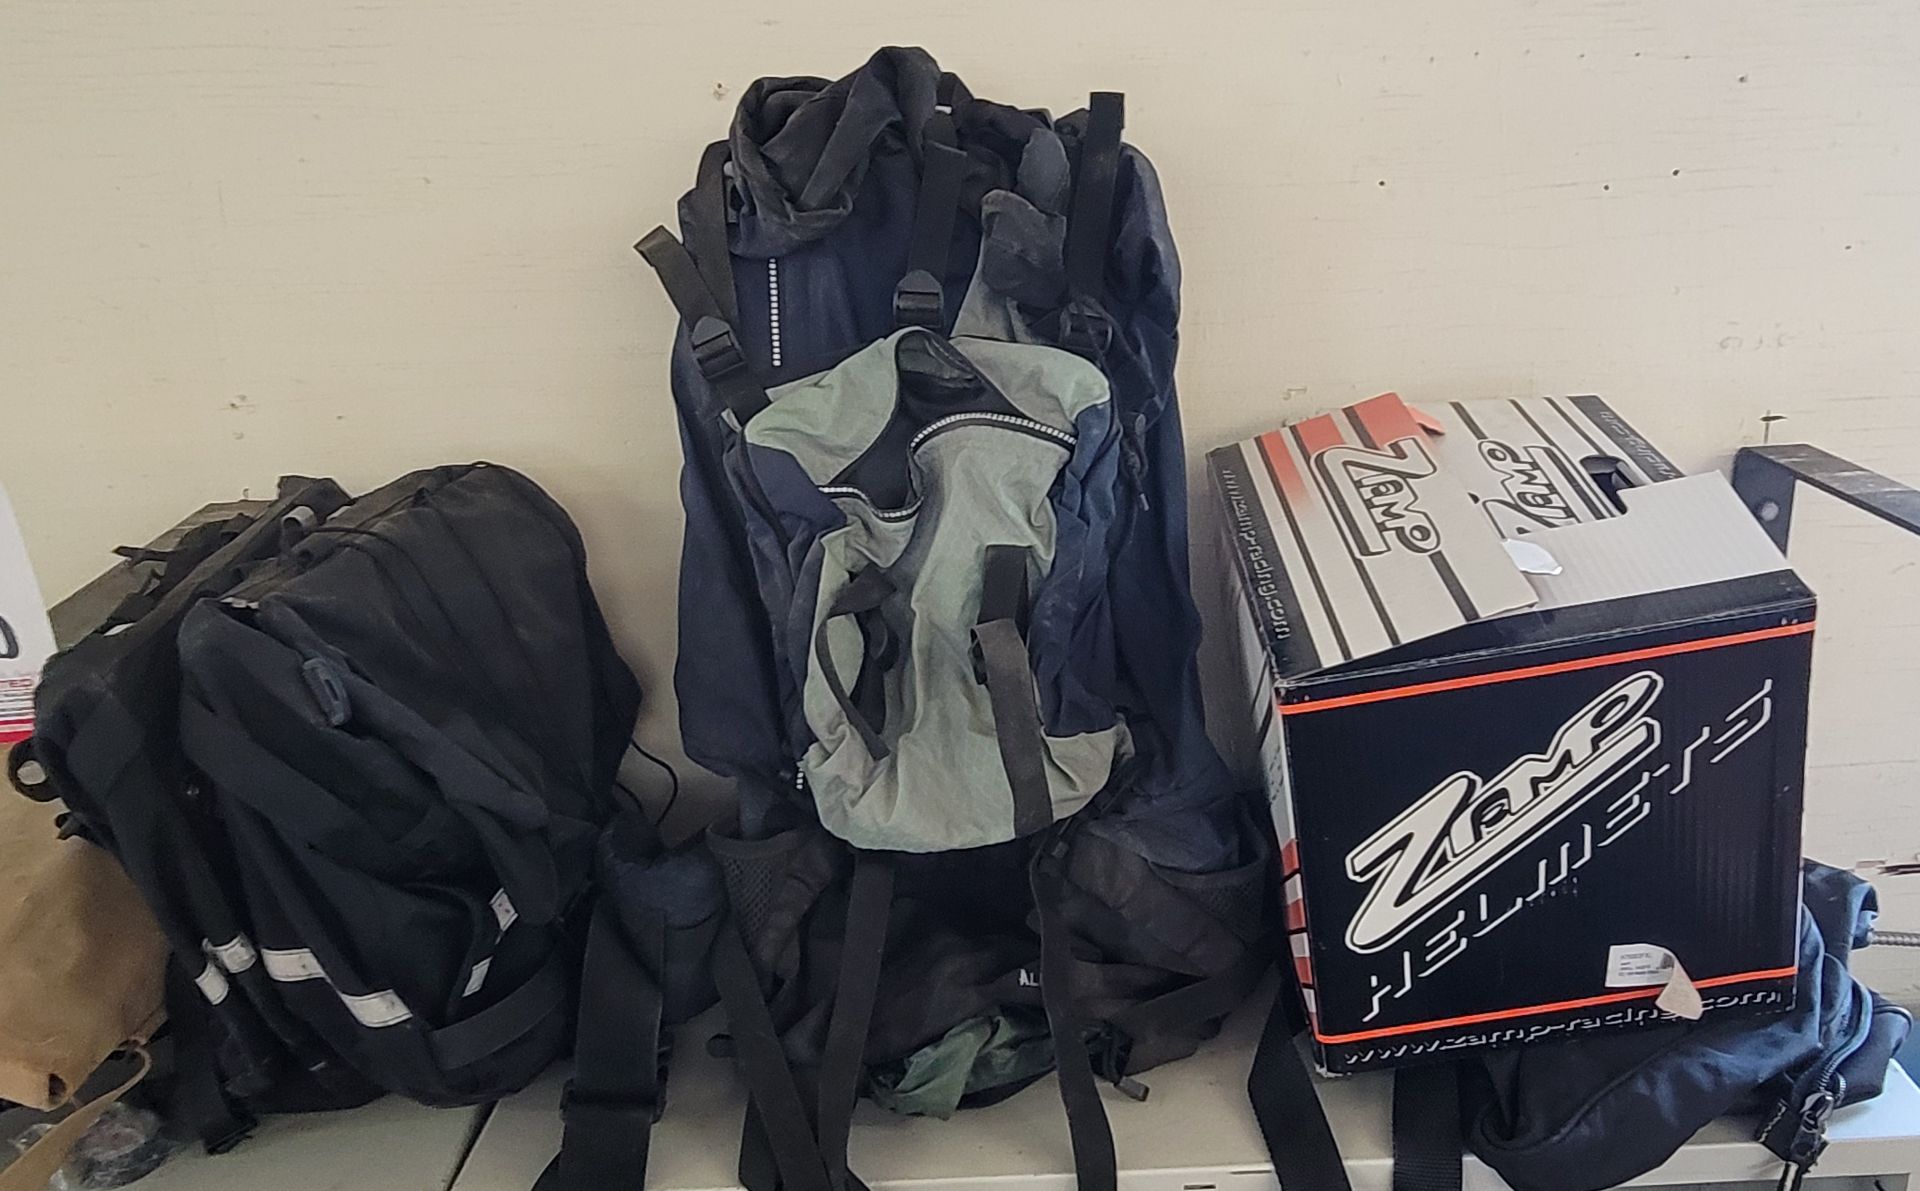 LOT - MISC ITEMS: ZAMP RACING HELMET, BICYCLE SADDLE BAGS, ALPINE BACKPACK, MISC BAGS - Image 3 of 5